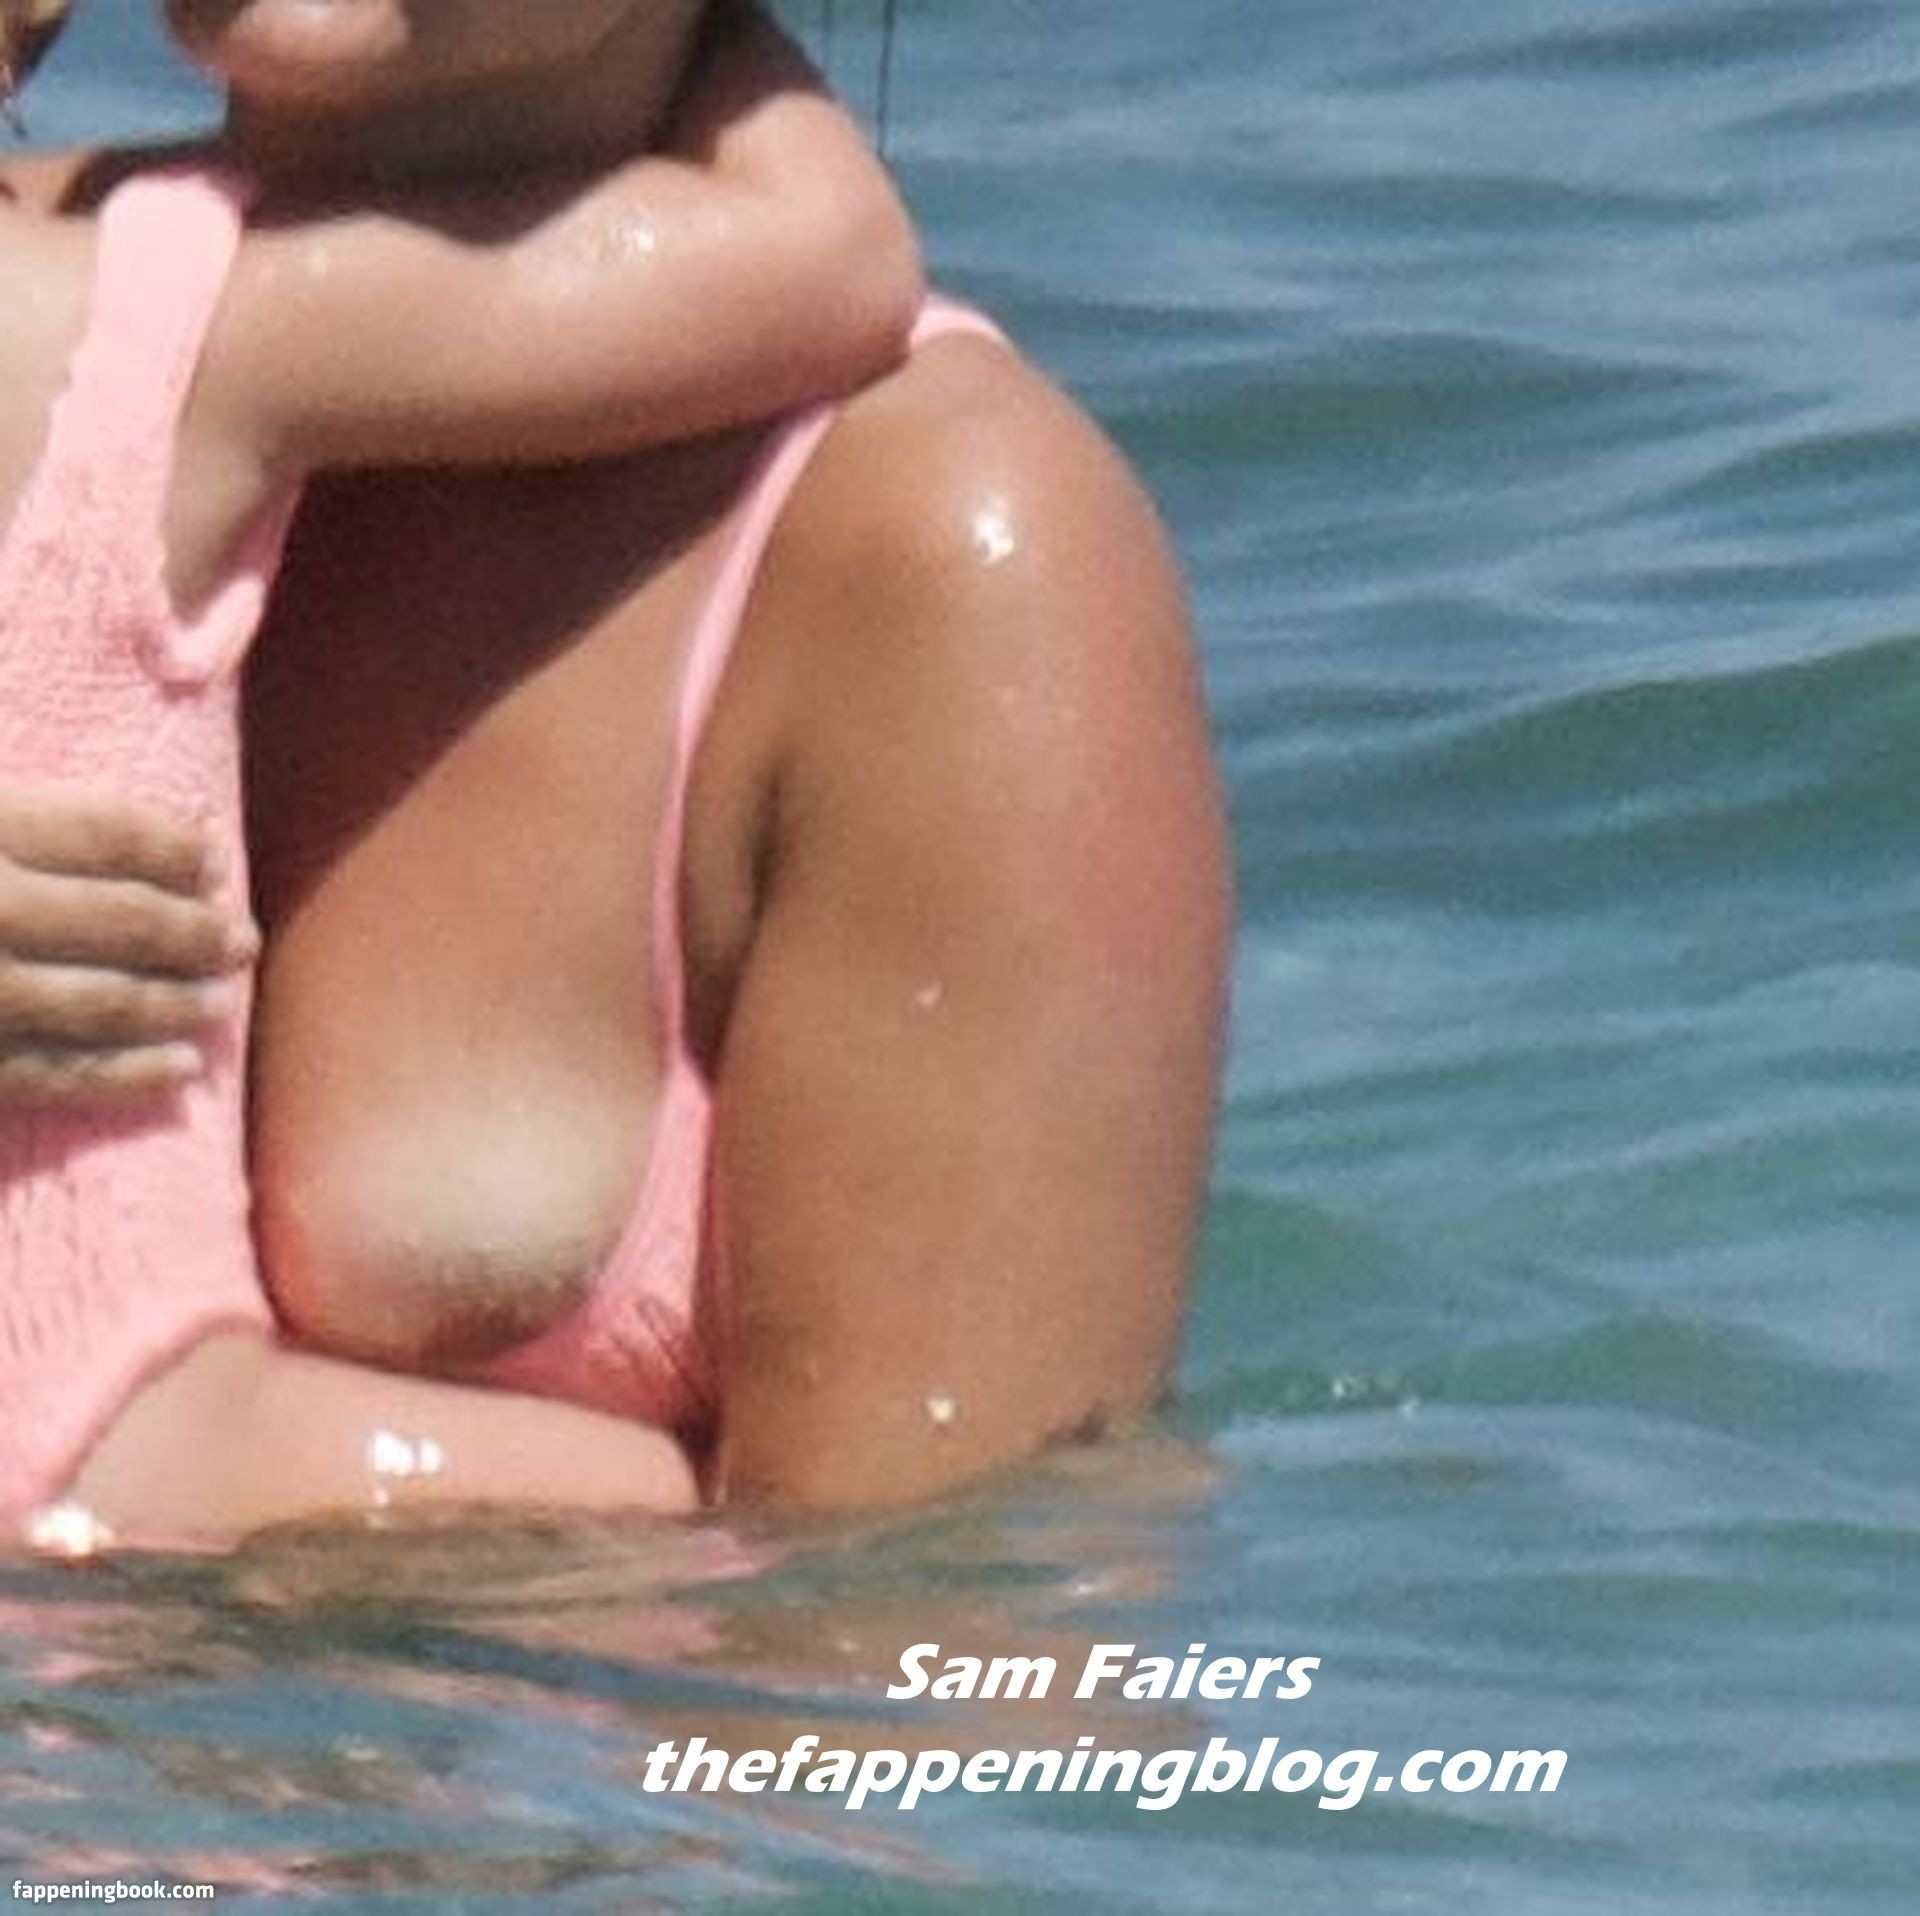 Sam Faiers Nude, The Fappening - Photo #1171125 - FappeningBook